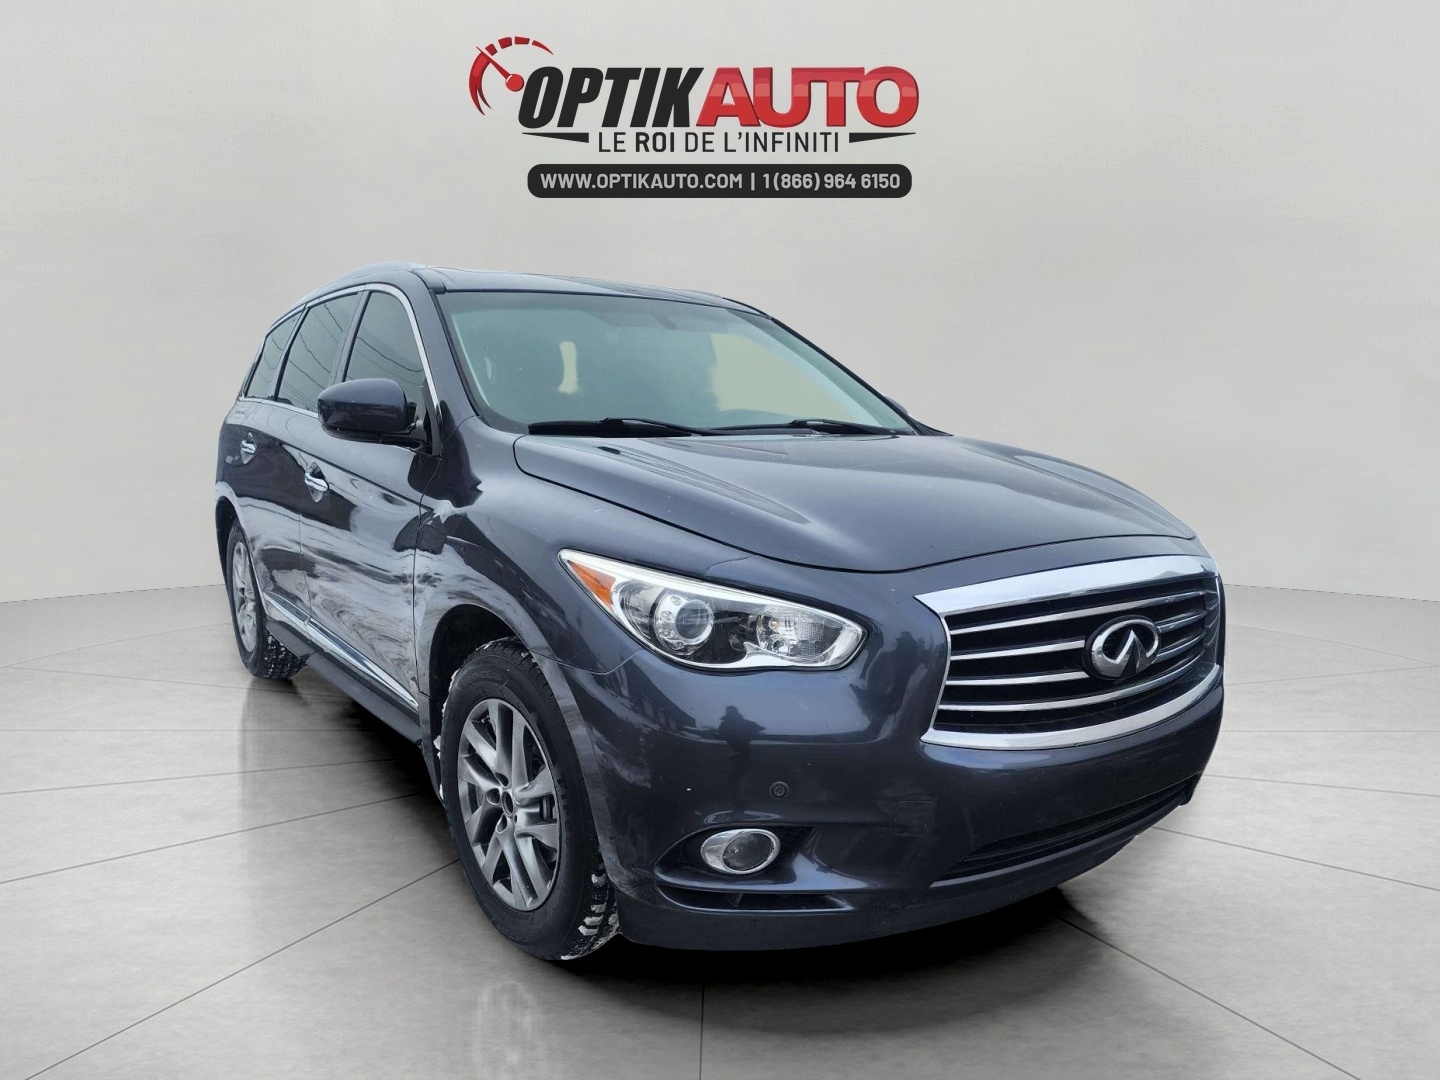 2014 Infiniti QX60 AWD 7 PASSAGERS 407$ EXCELLENT CONDITION 